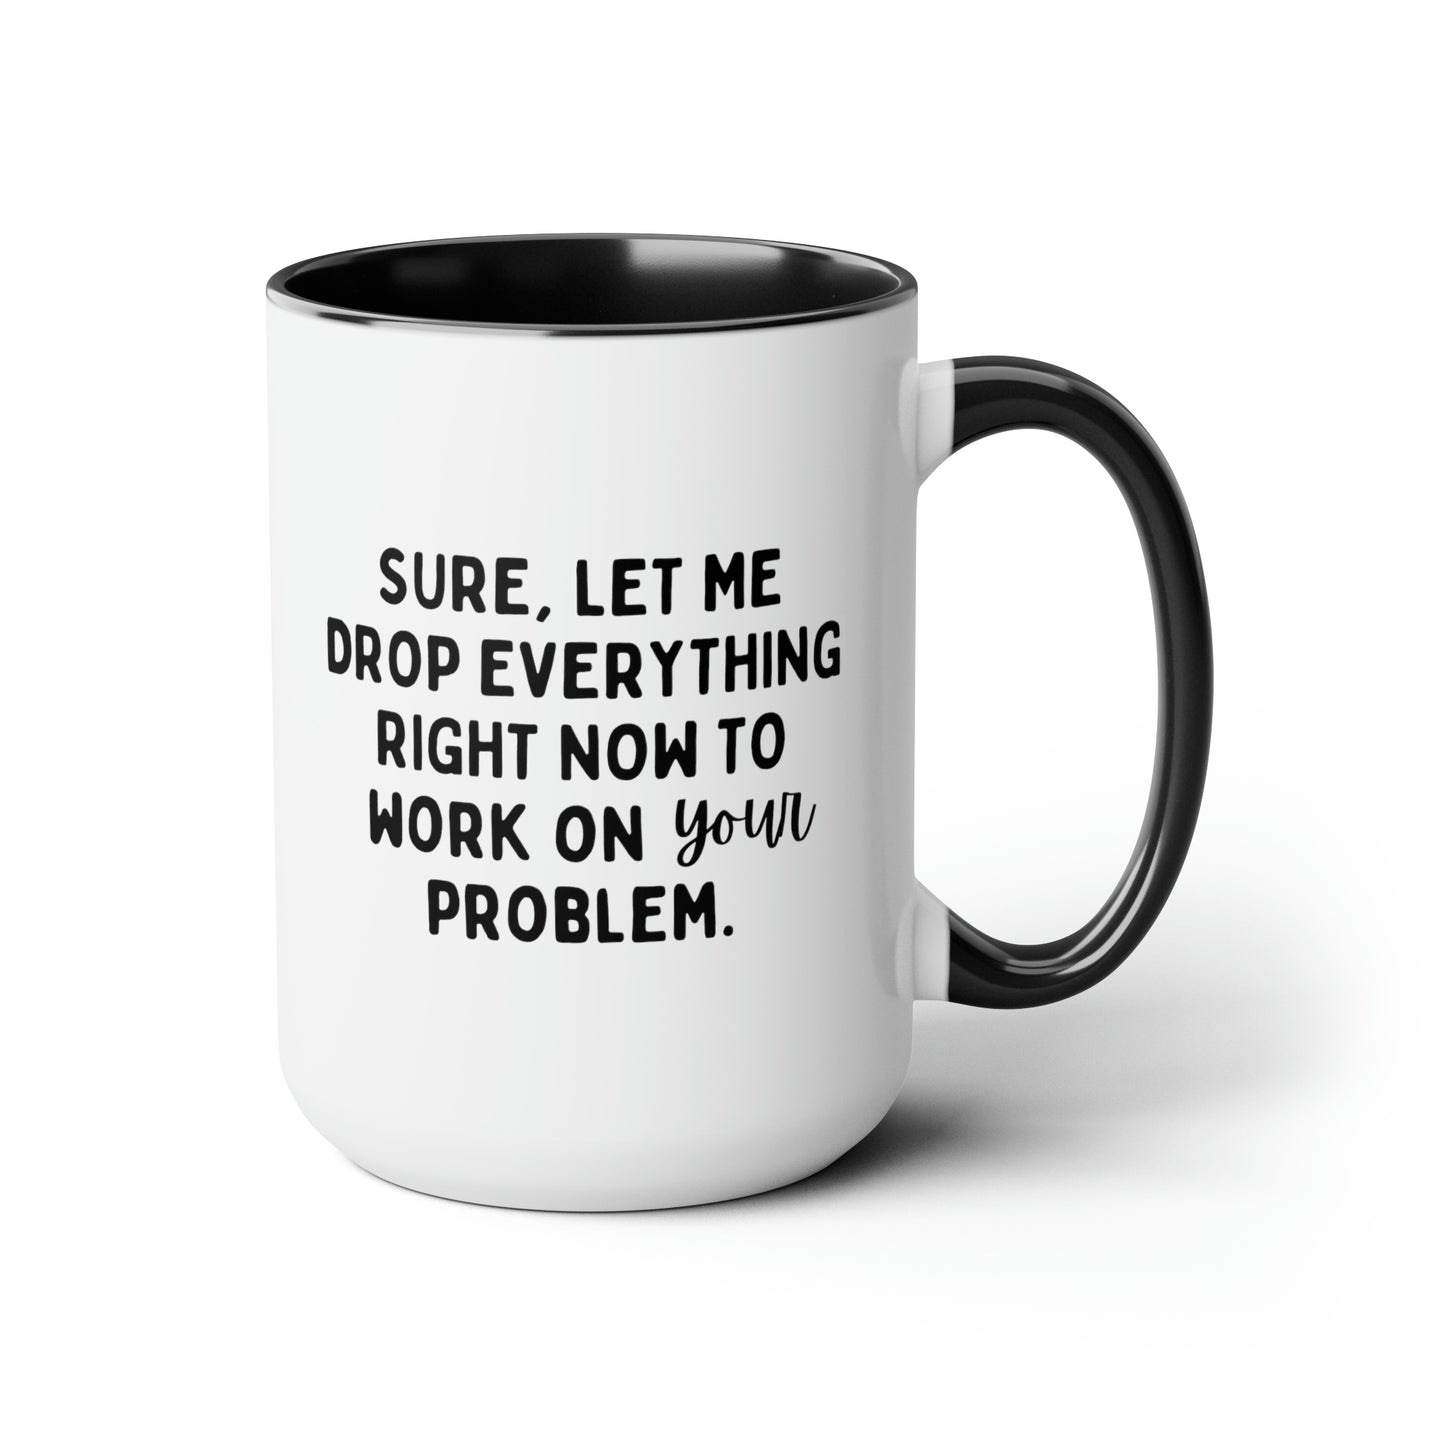 Sure Let Me Drop Everything Right Now To Work On Your Problem 15oz white with black accent funny large coffee mug gift for boss coworker colleague hate job office sarcastic waveywares wavey wares wavywares wavy wares